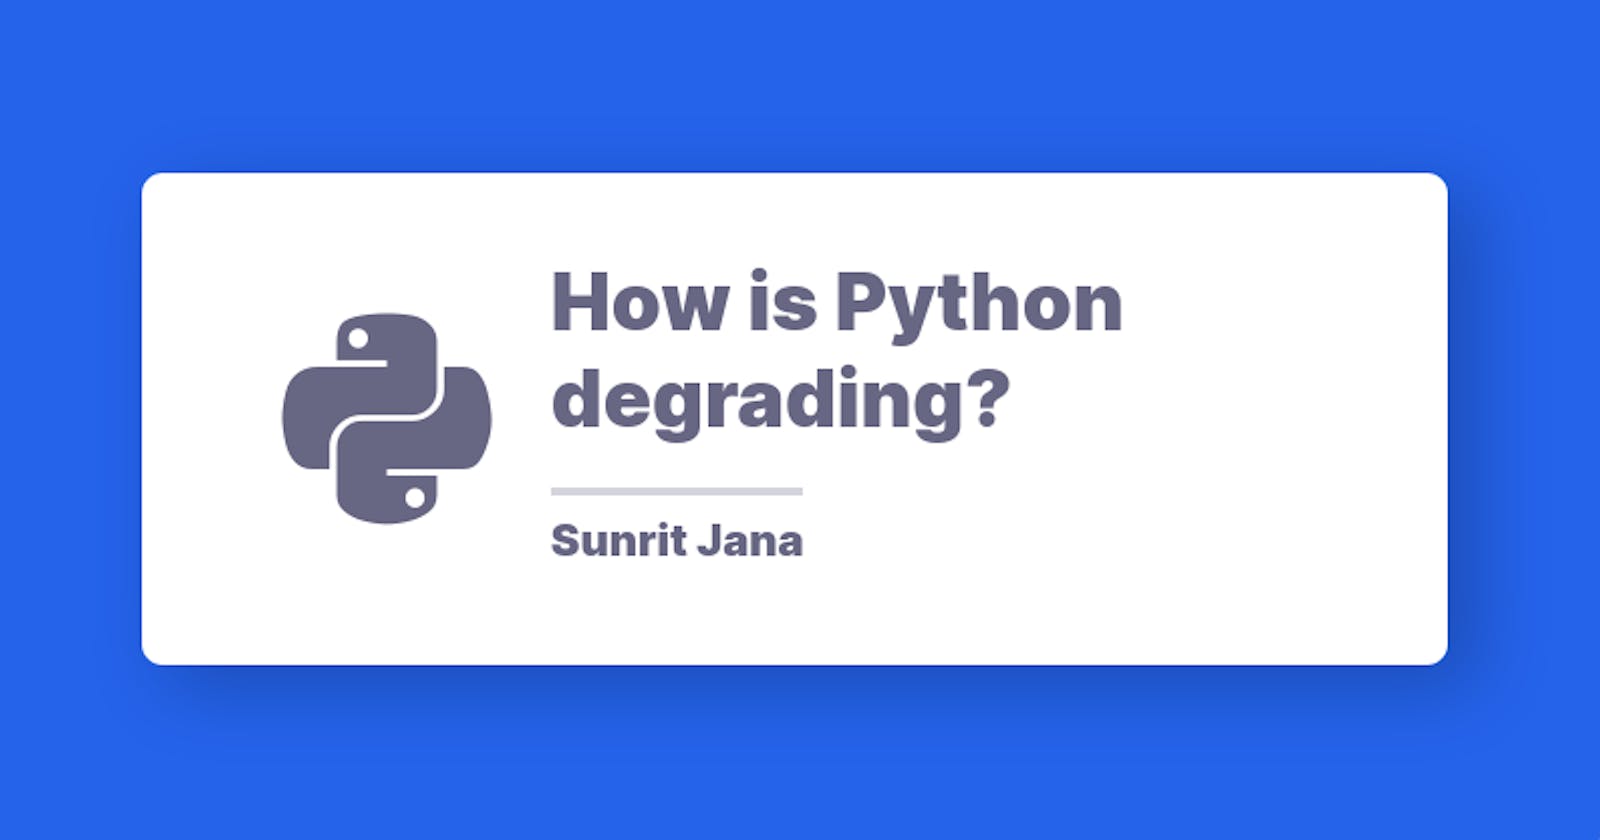 How is Python degrading?